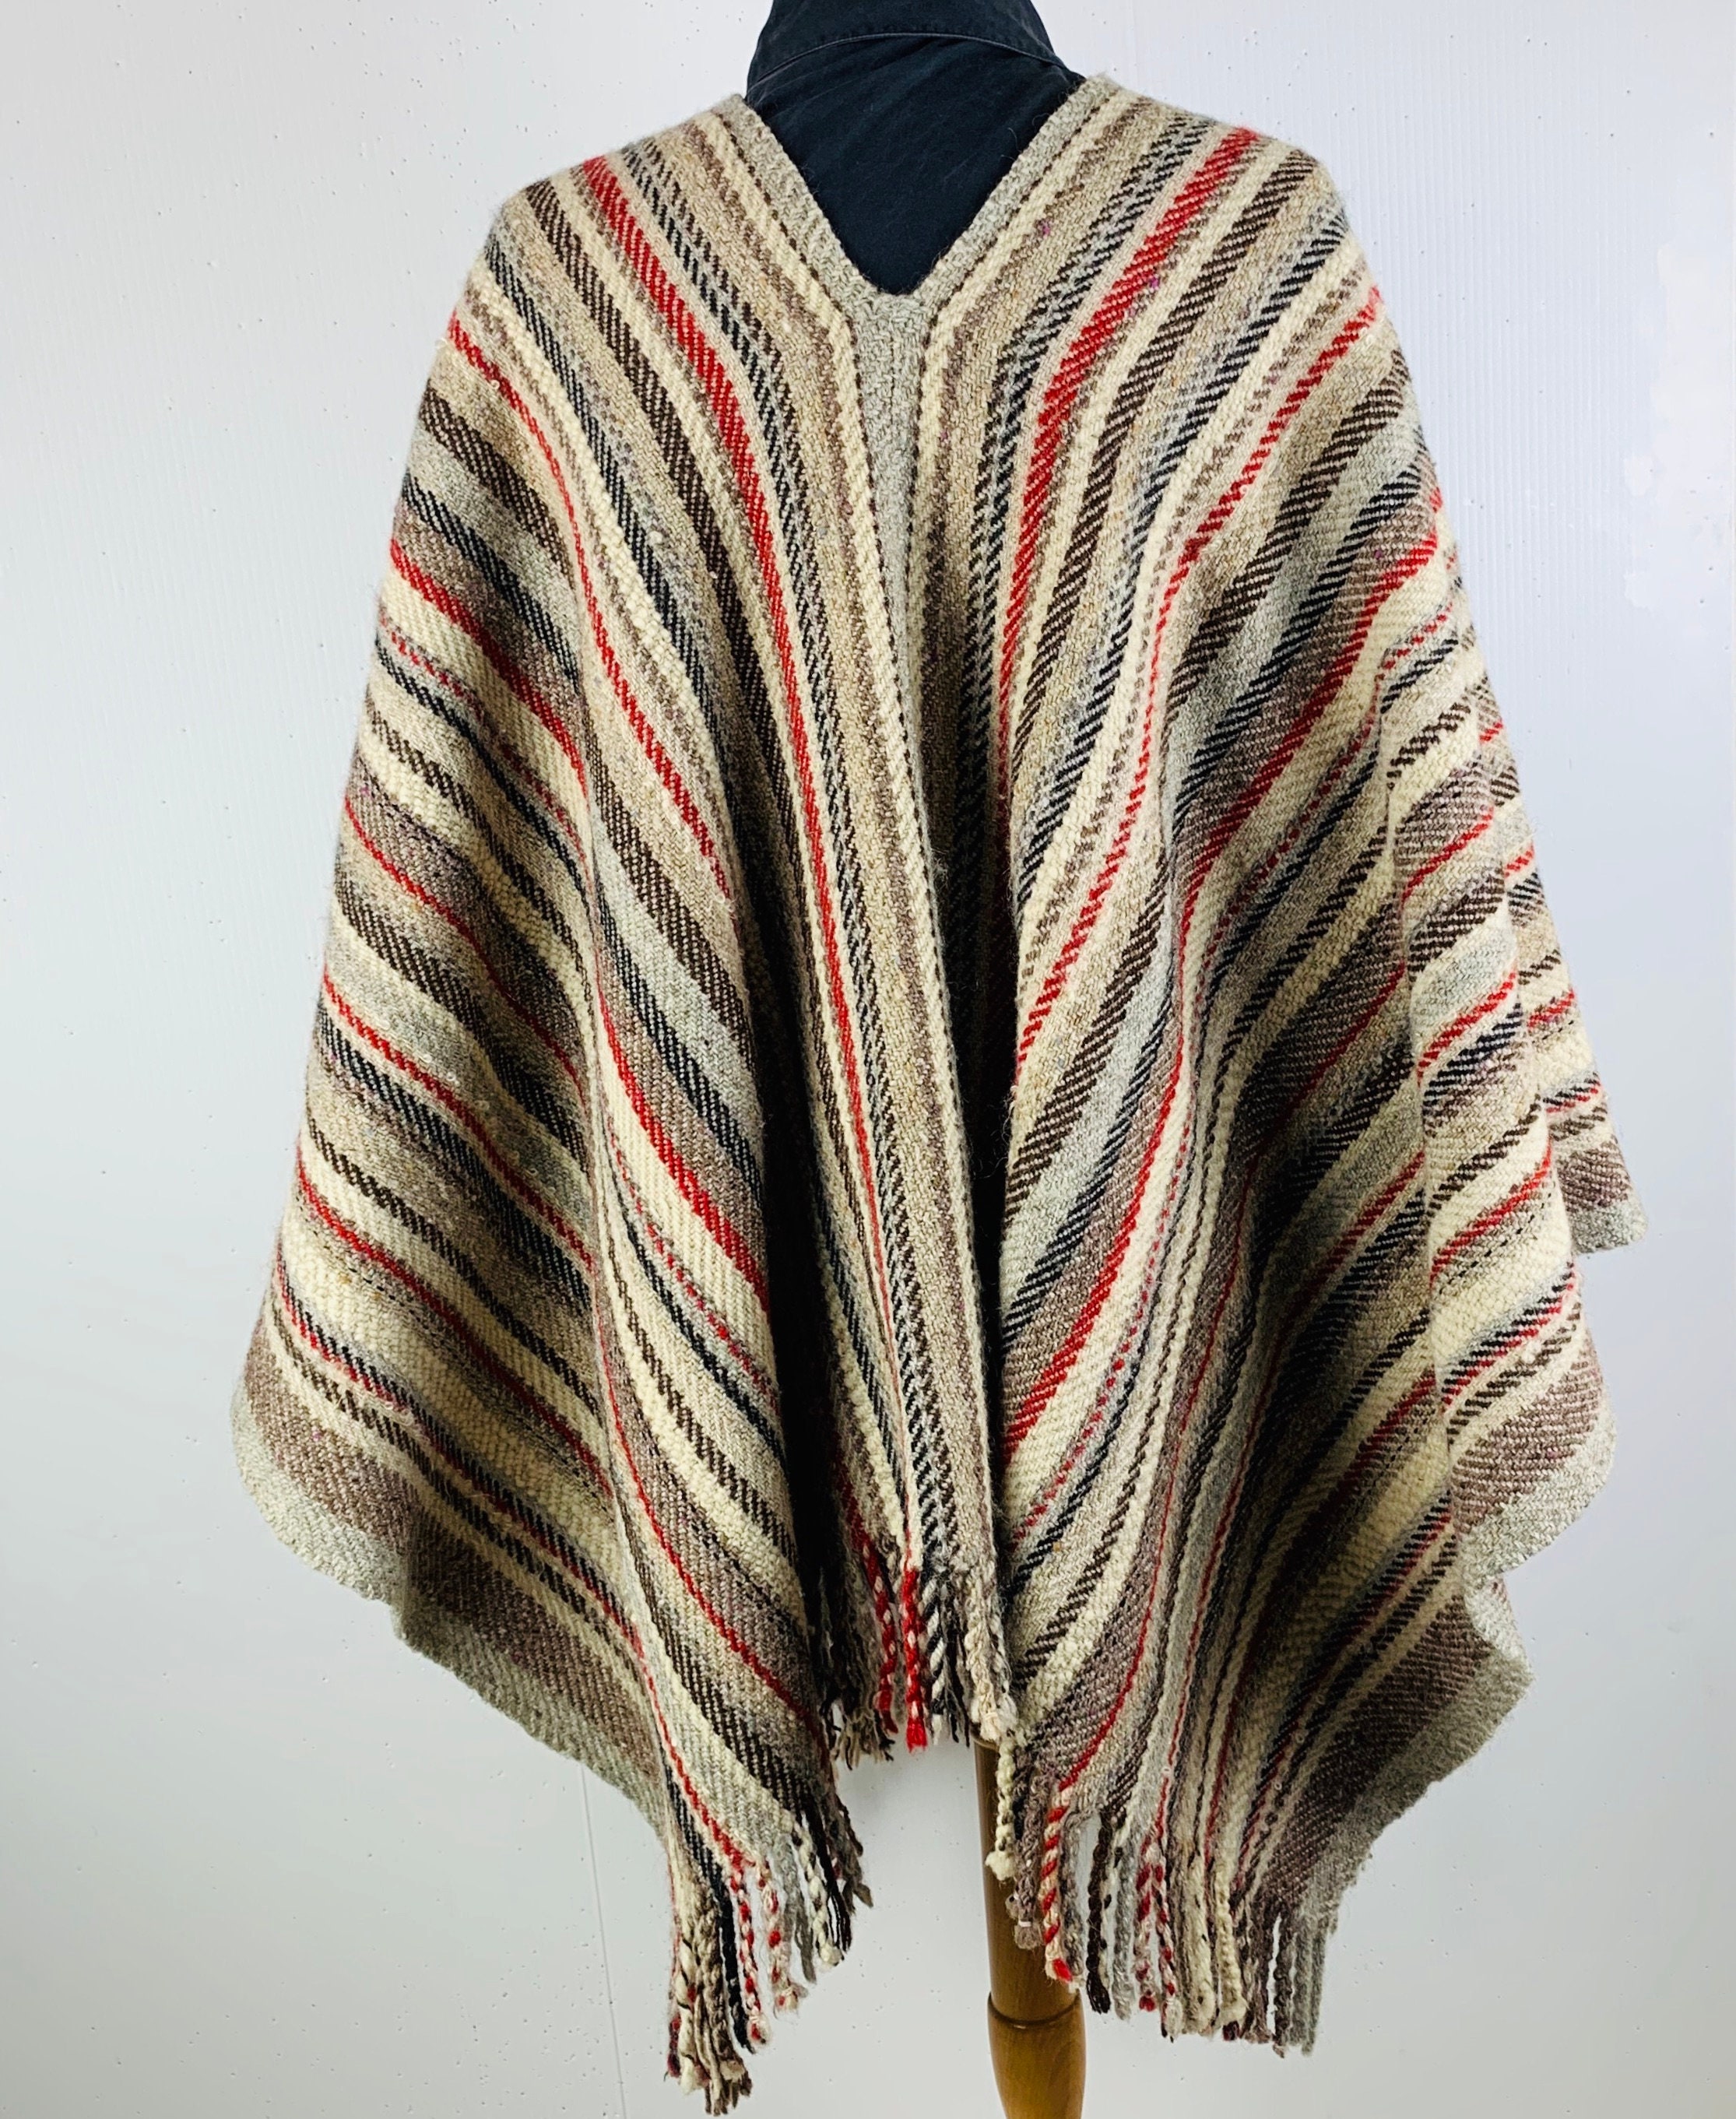 Artist Loom Woven Poncho 100% Wool Stripes Fringe Handwoven by - Etsy